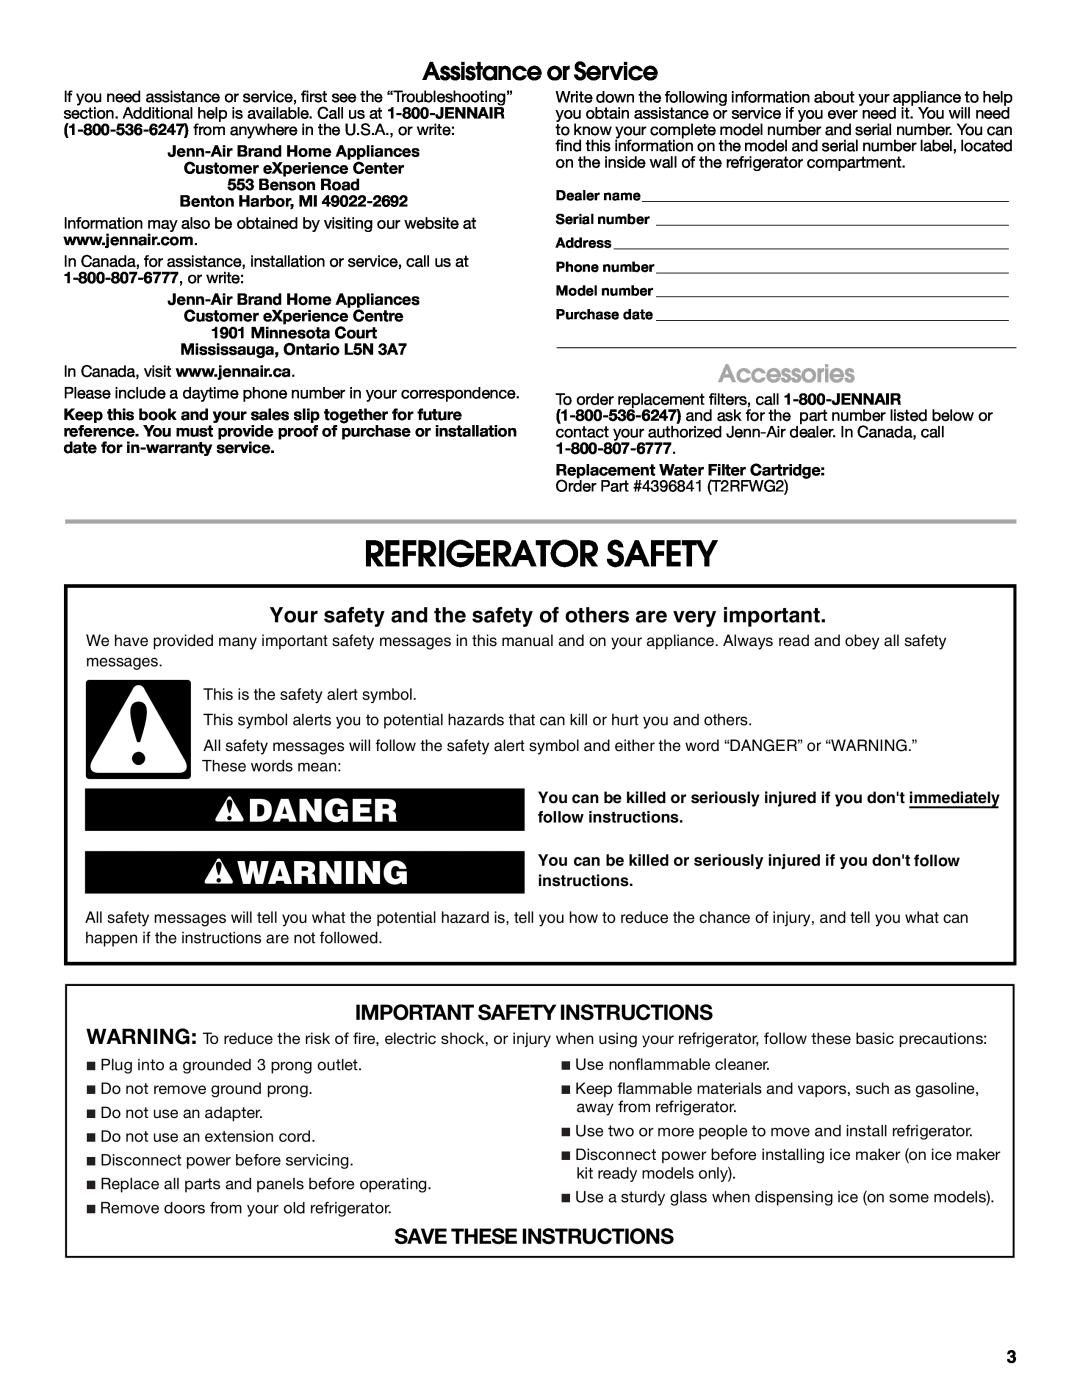 Jenn-Air W10183787A manual Refrigerator Safety, Danger, Assistance or Service, Accessories, Important Safety Instructions 